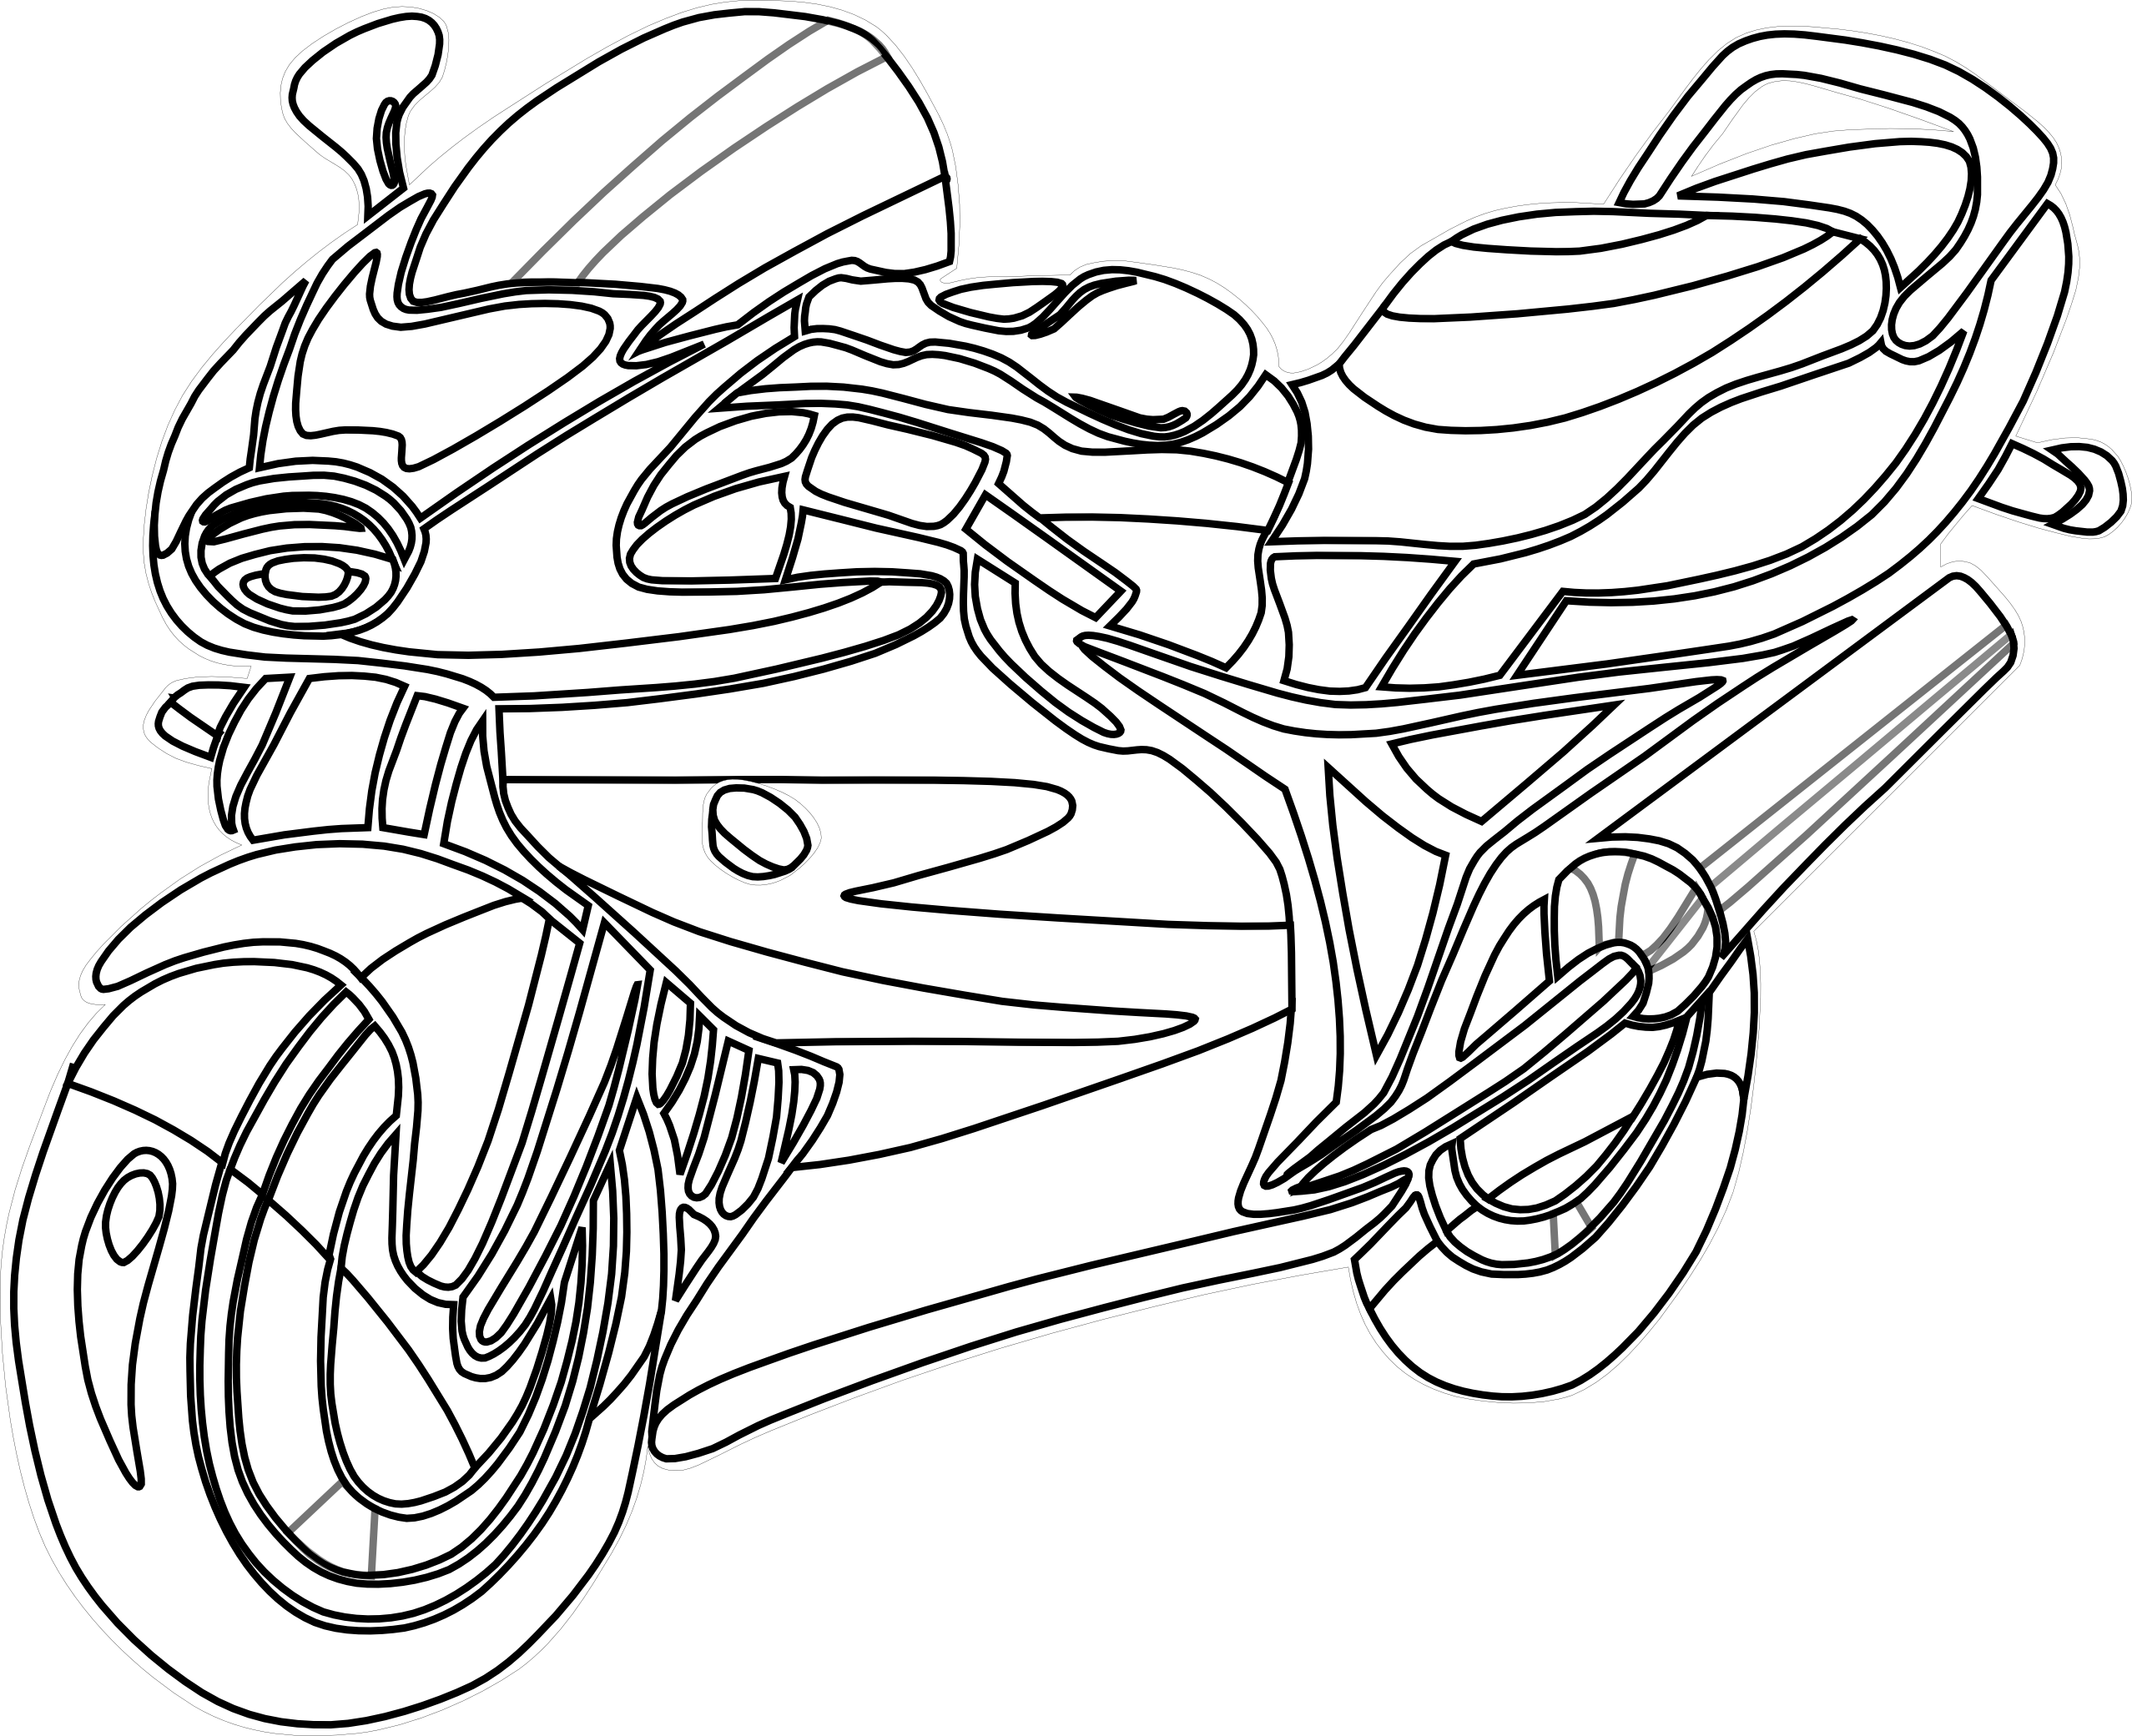 Free motorcycle clipart motorcycle clip art pictures graphics 2 3